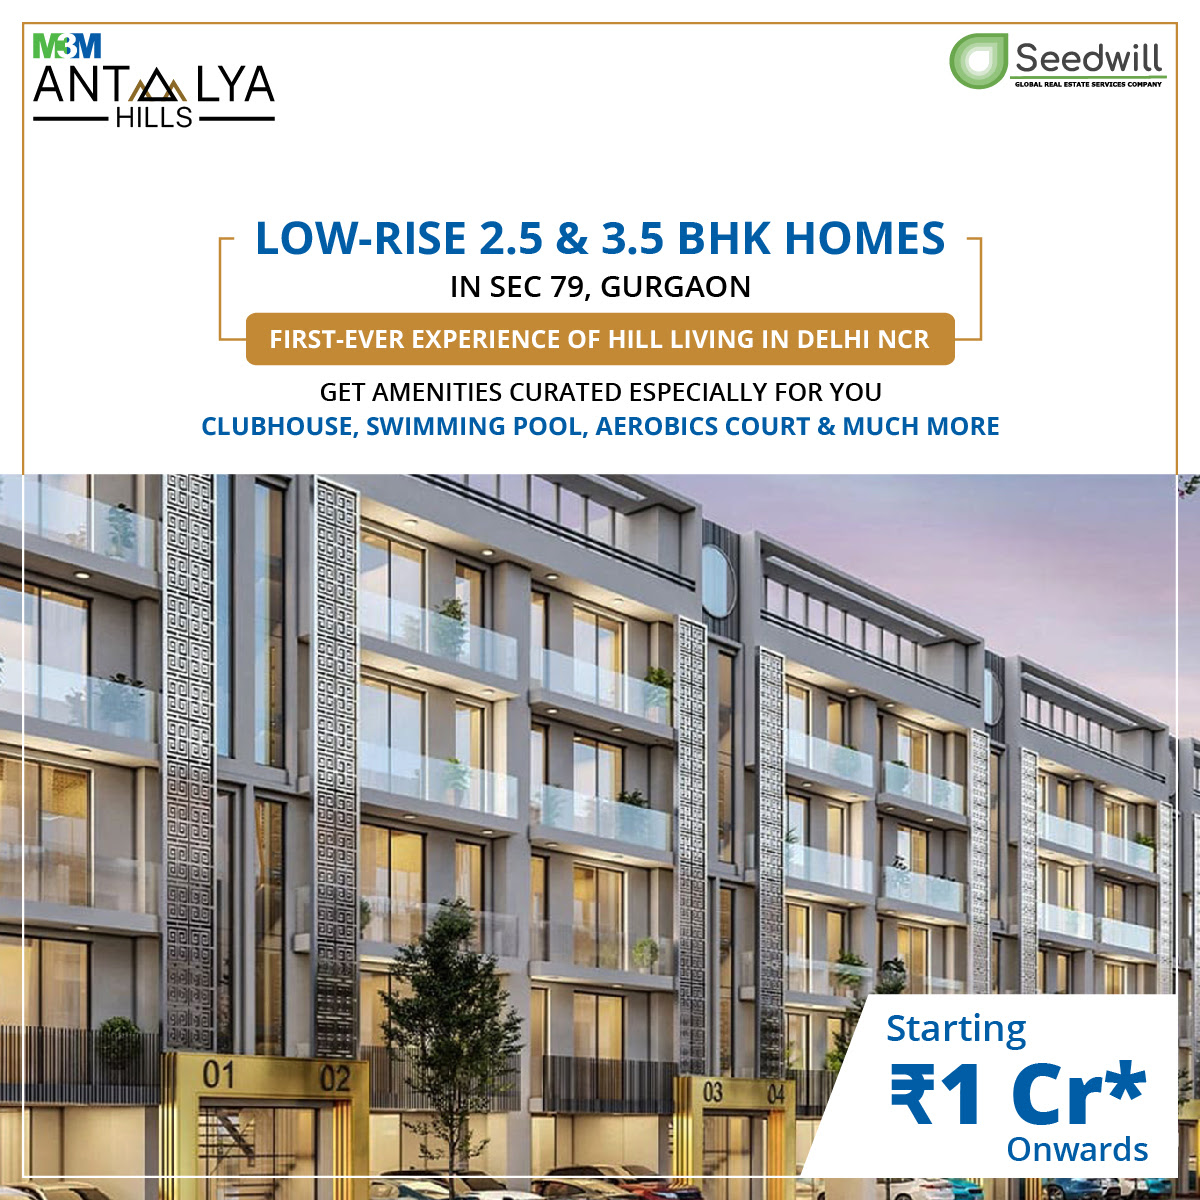 Low rise 2.5 and 3.5 BHK Home Rs 1 Cr at M3M Antalya Hills, Gurgaon